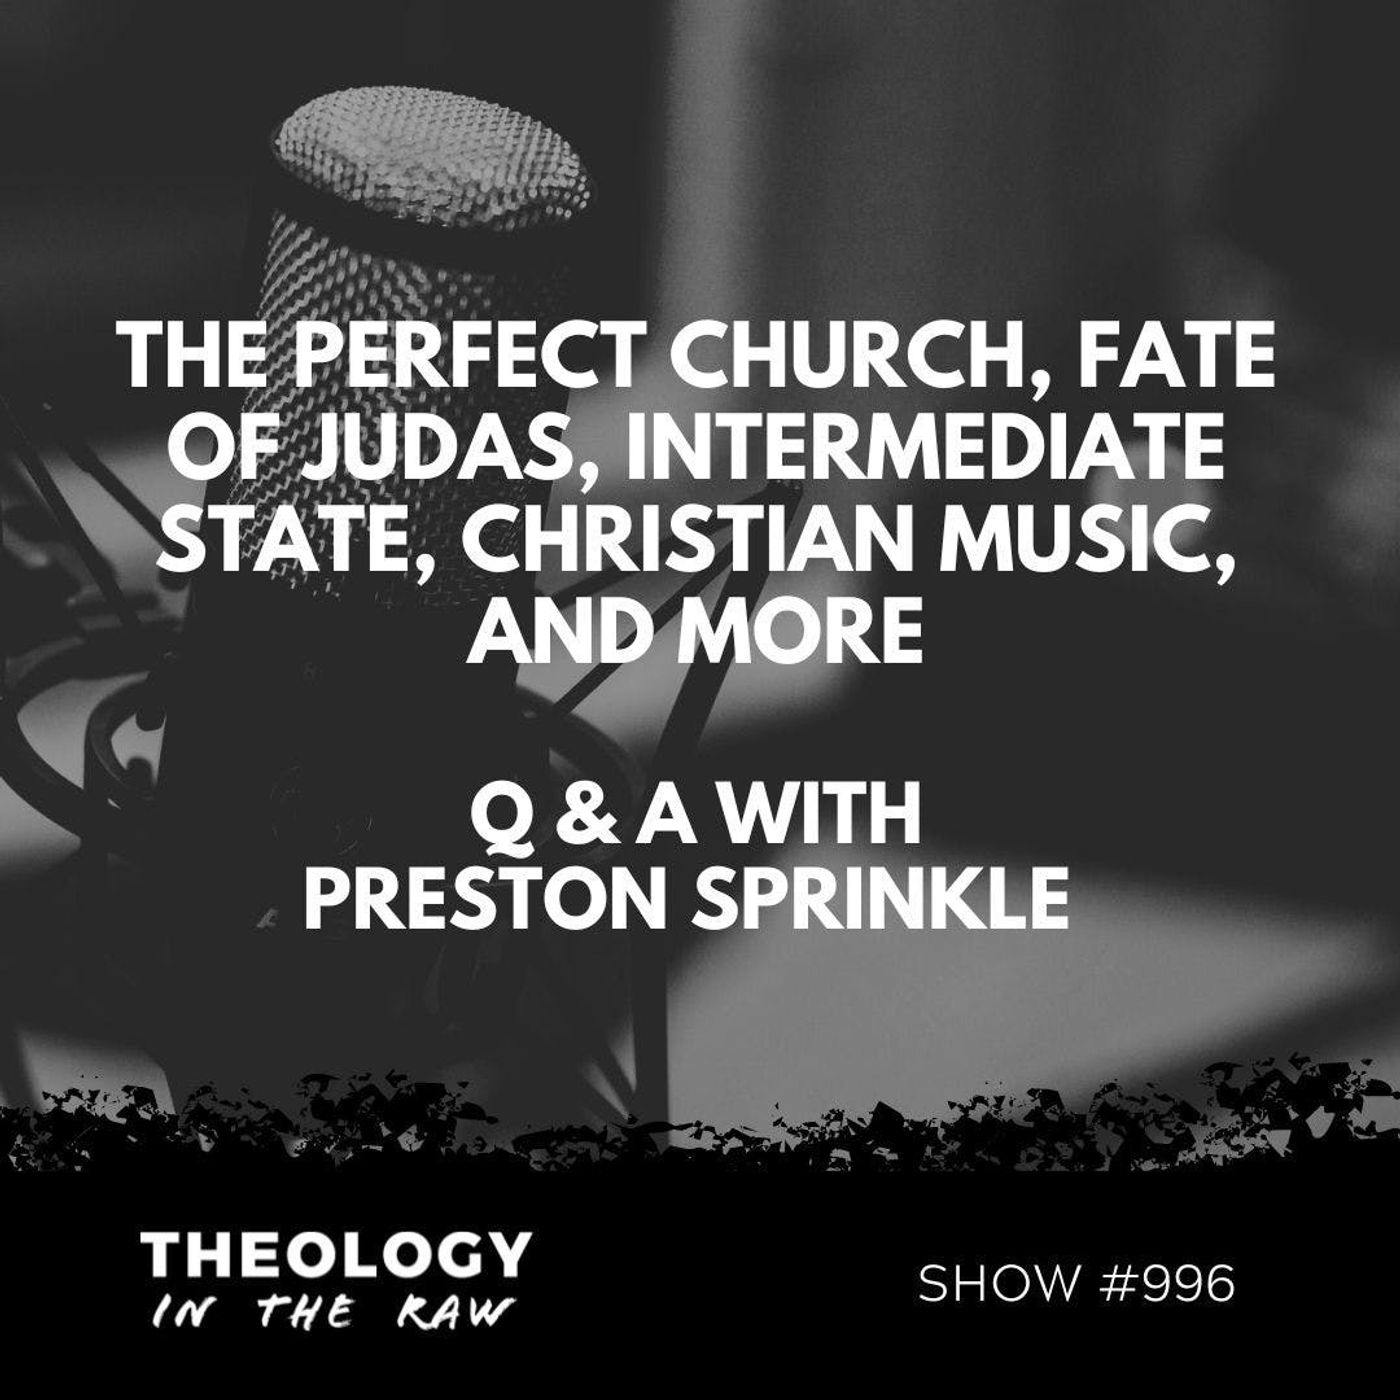 S9 Ep996: #996 - The Perfect Church, Fate of Judas, Intermediate State, Christian Music, and More: Q & A with Preston Sprinkle